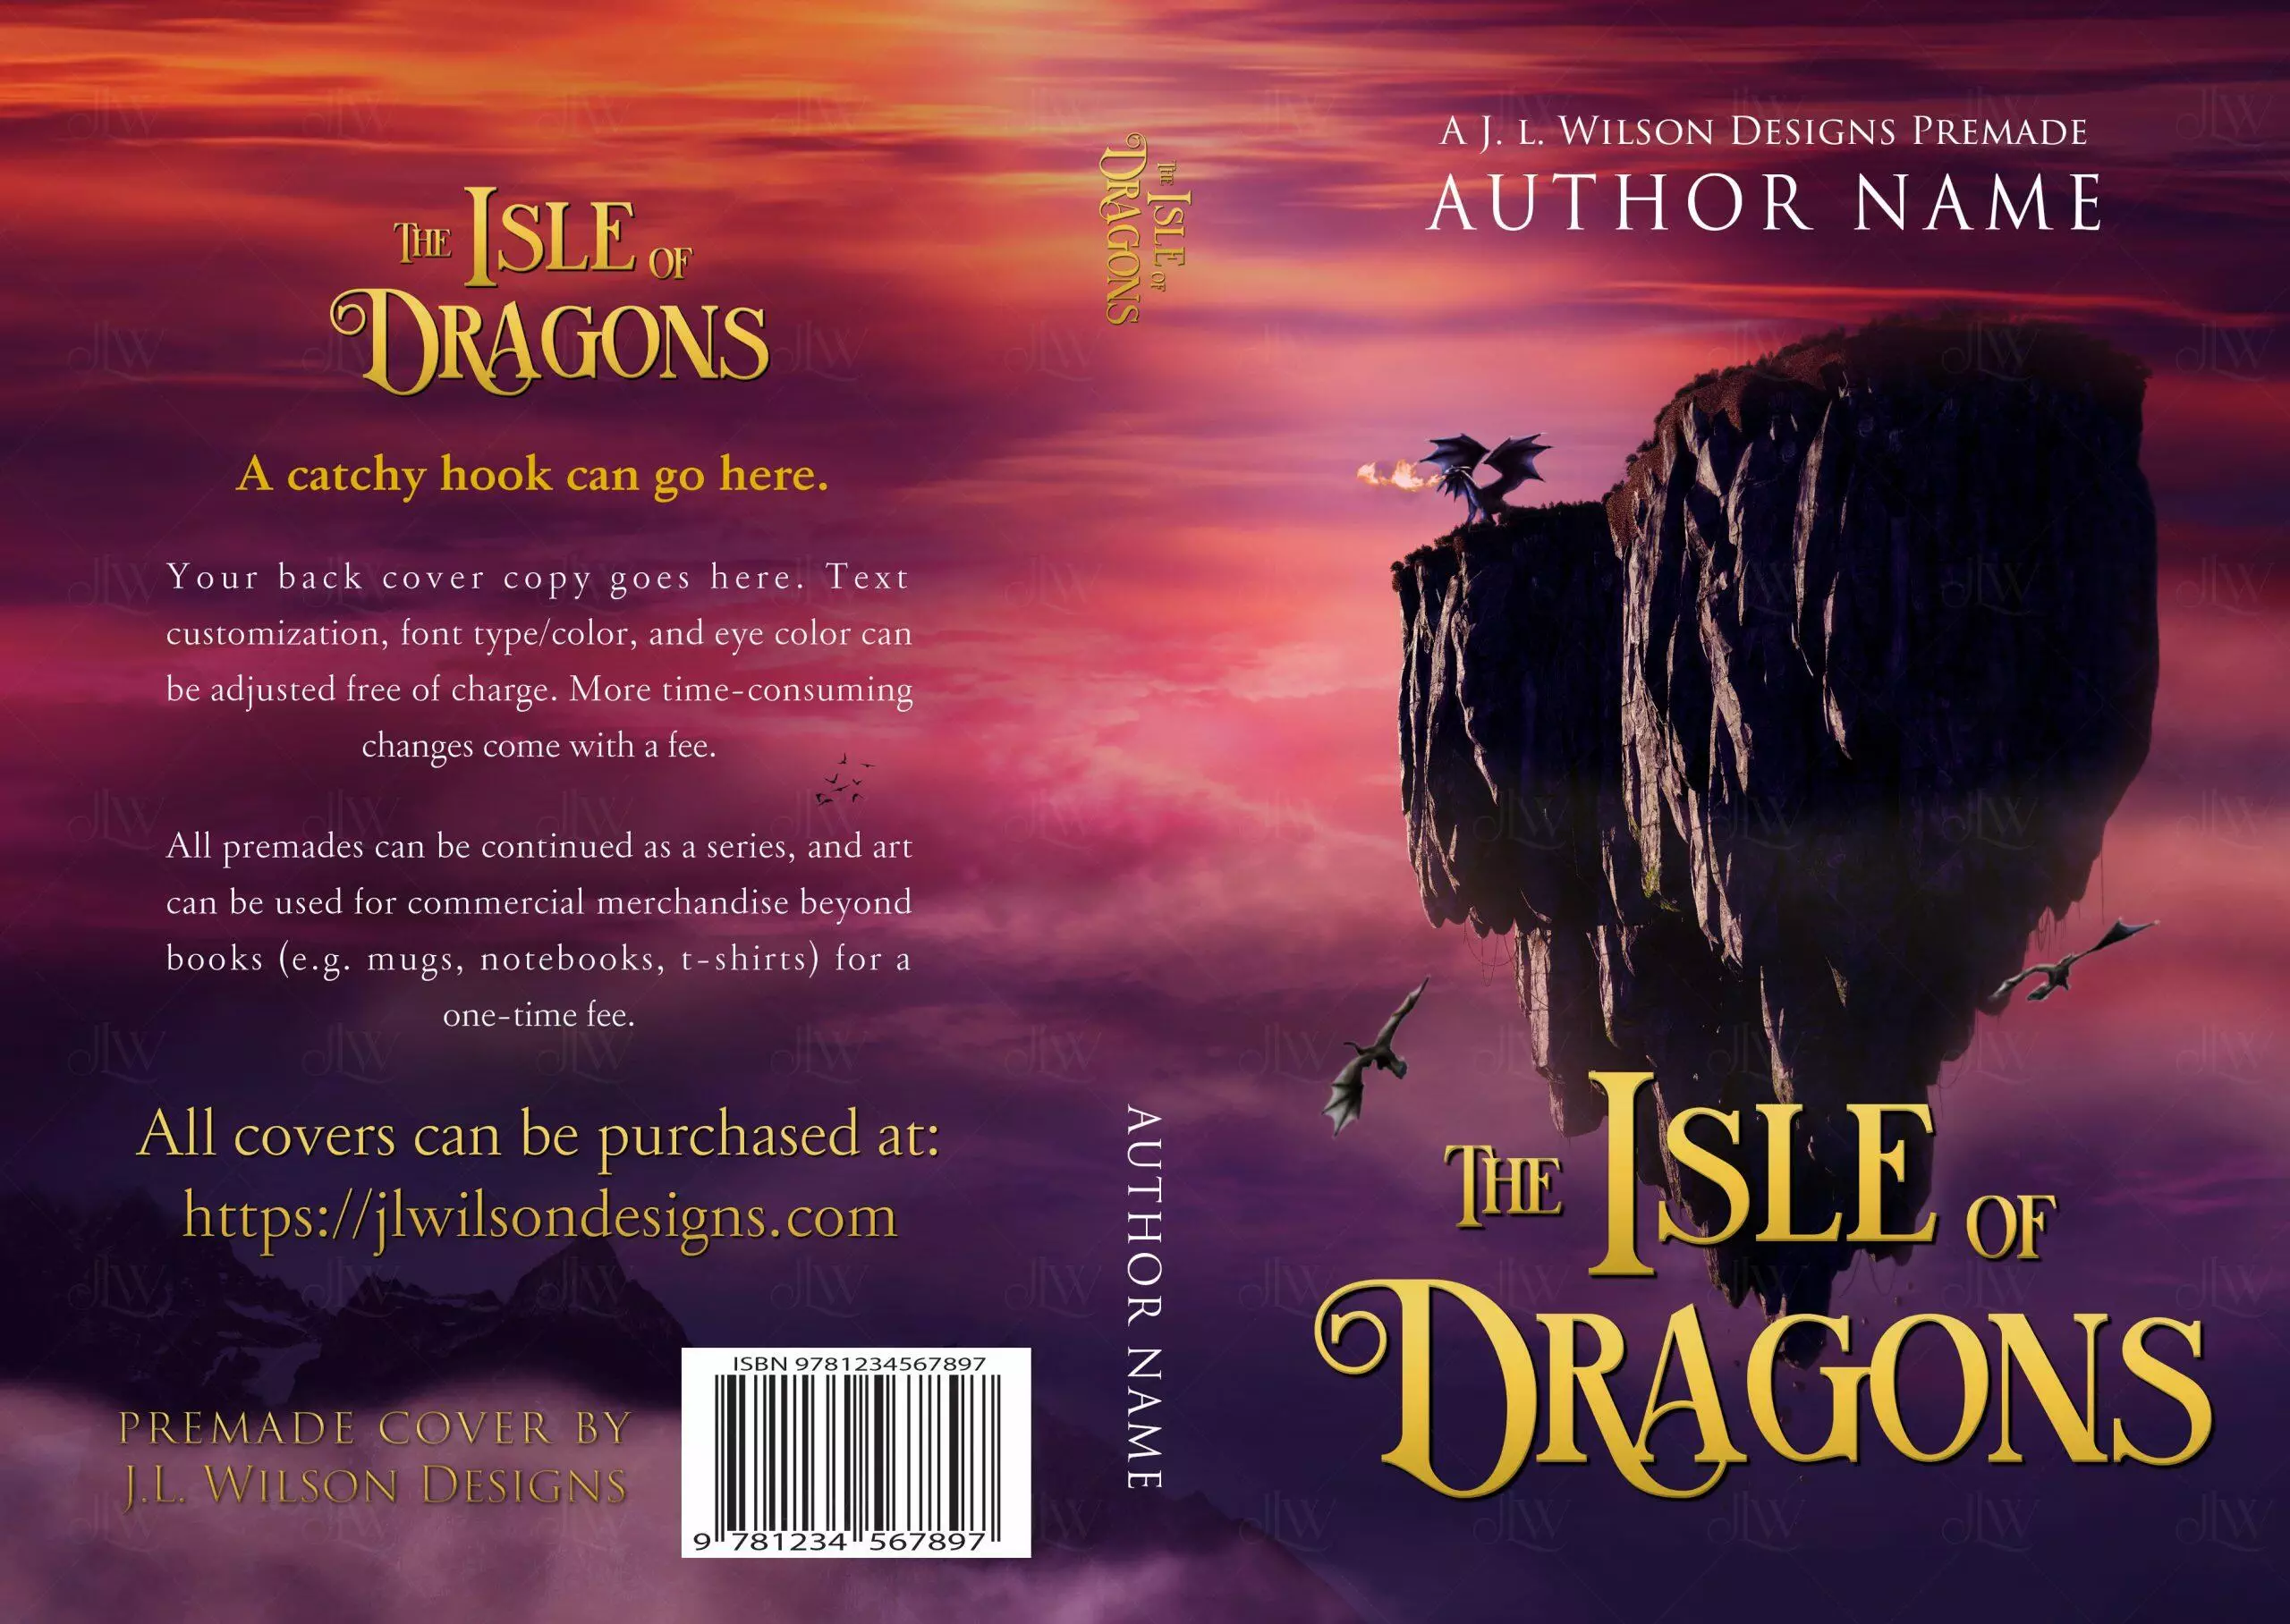 A fantasy book cover with a floating island of dragons against a pink and purple sky